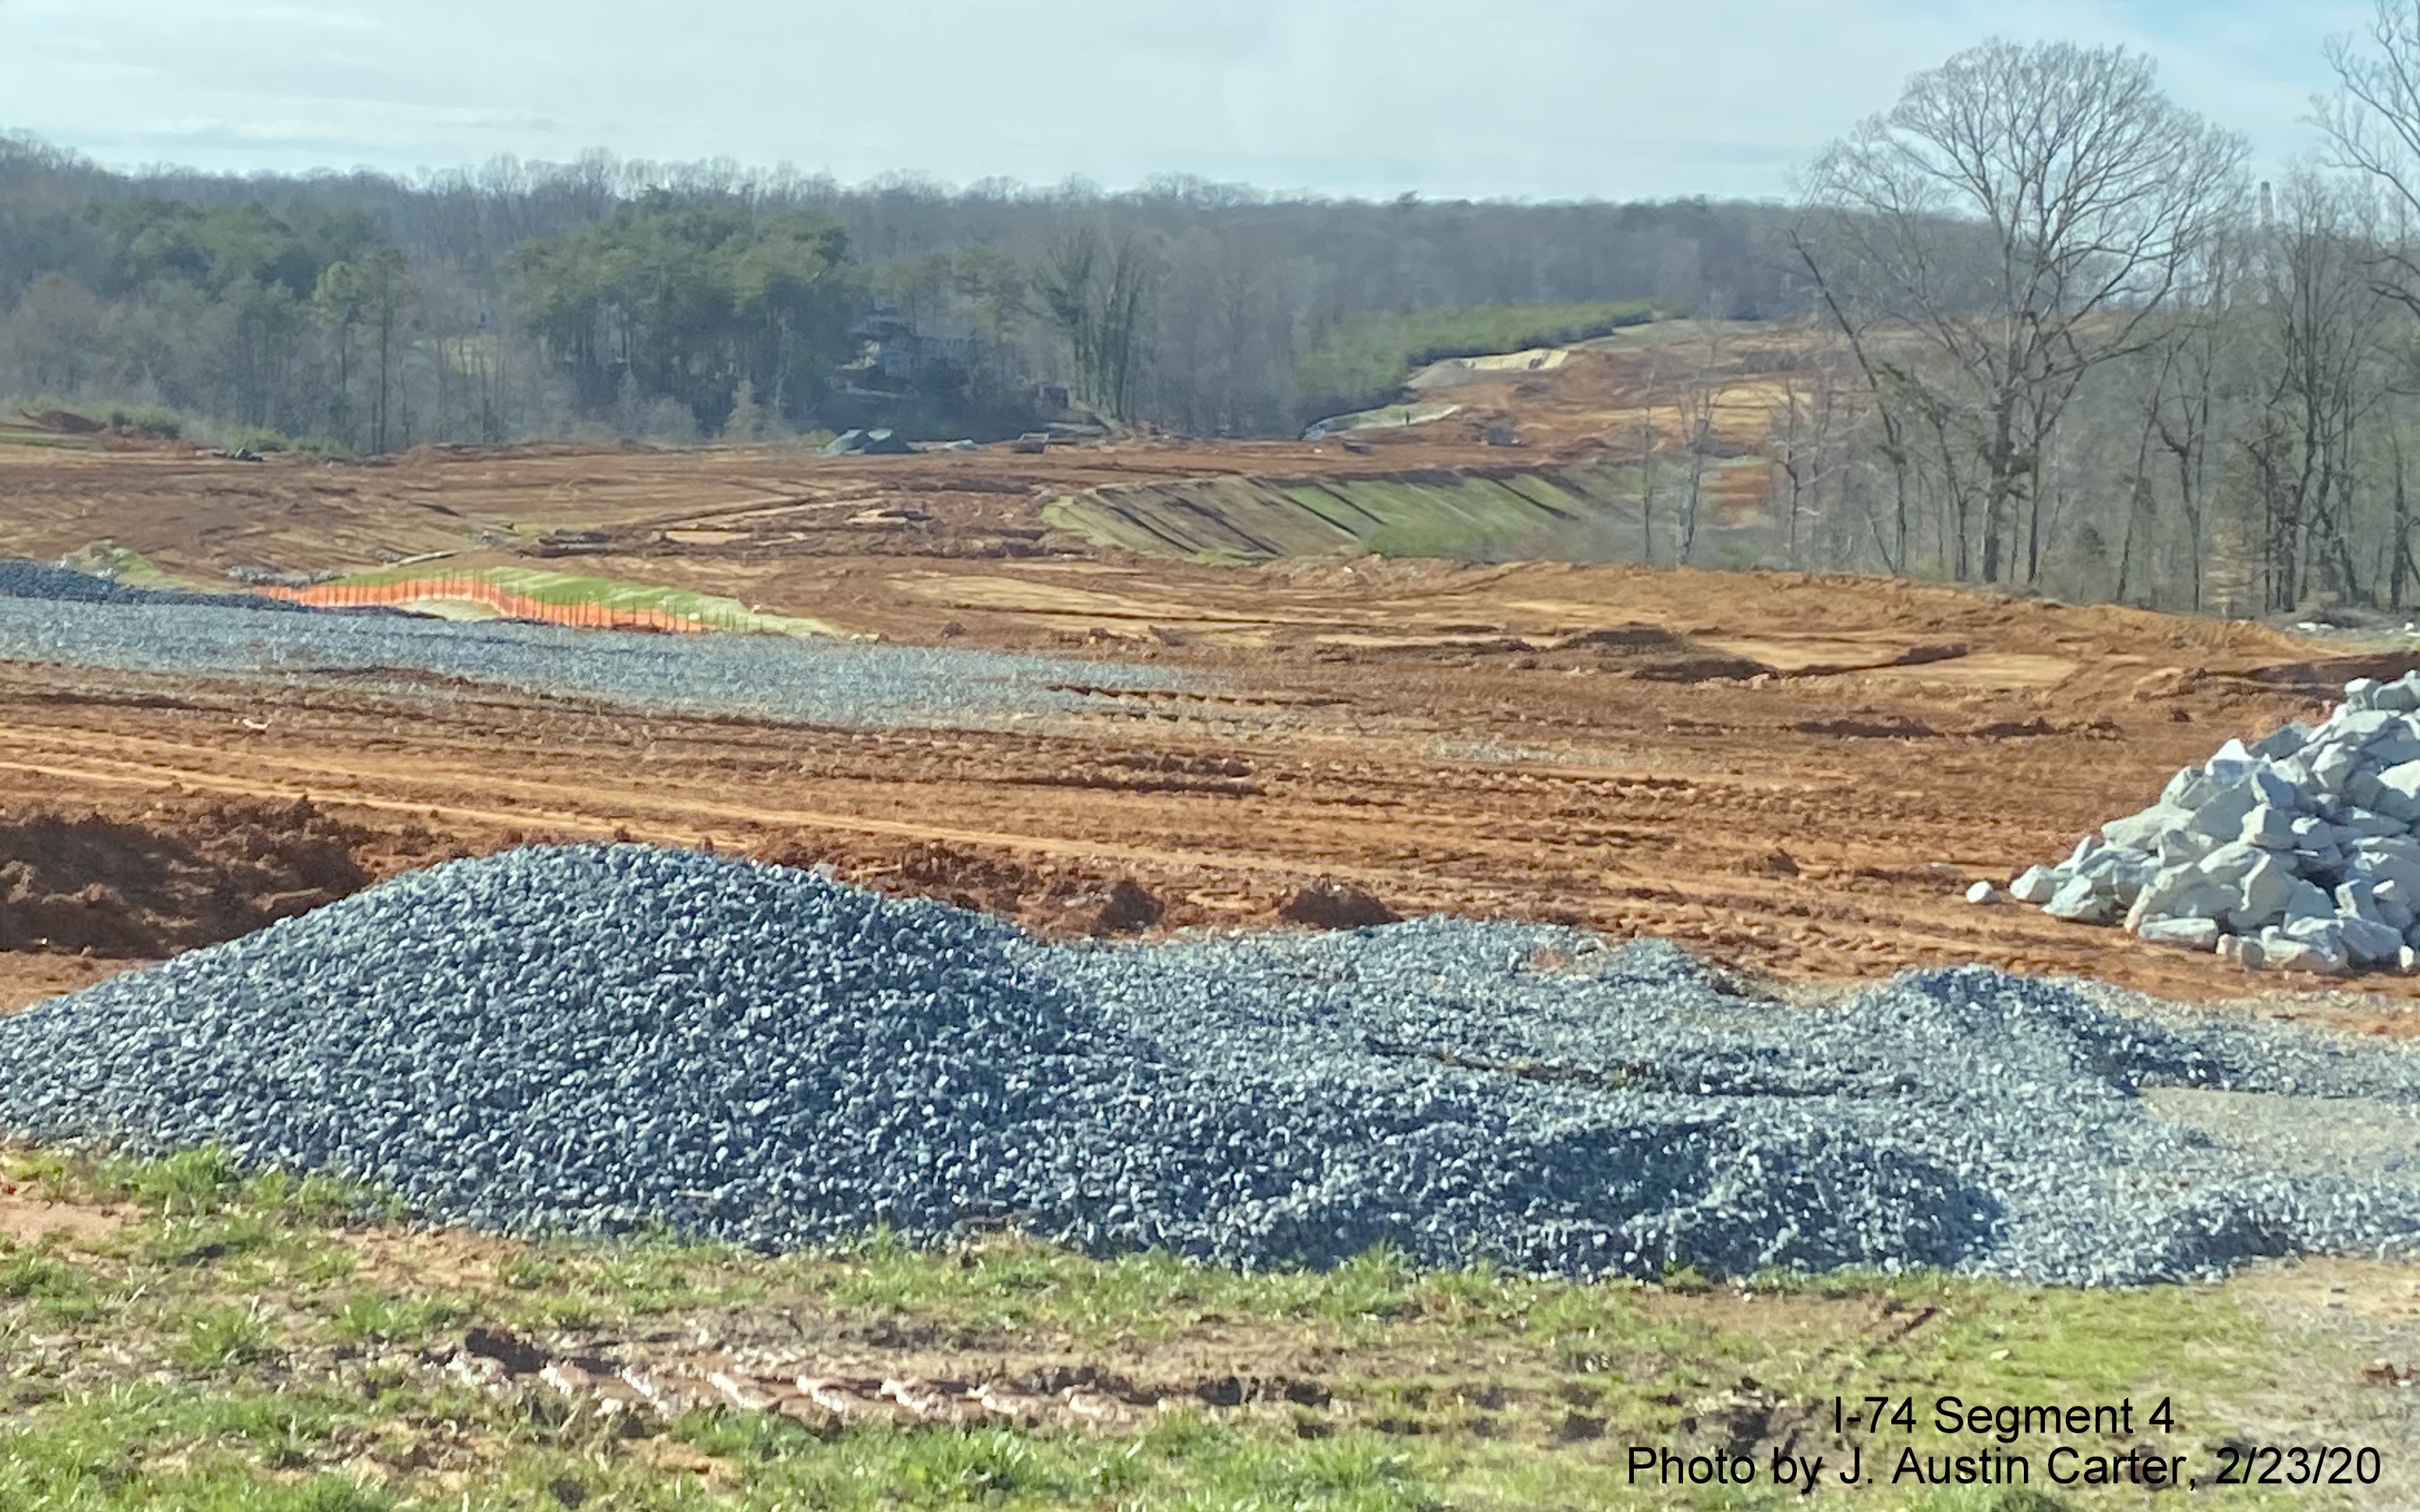 Image of graded roadbed for future I-74 Winston-Salem Northern Beltway in vicinity of US 311 
        interchange, by J. Austin Carter in Feb. 2020